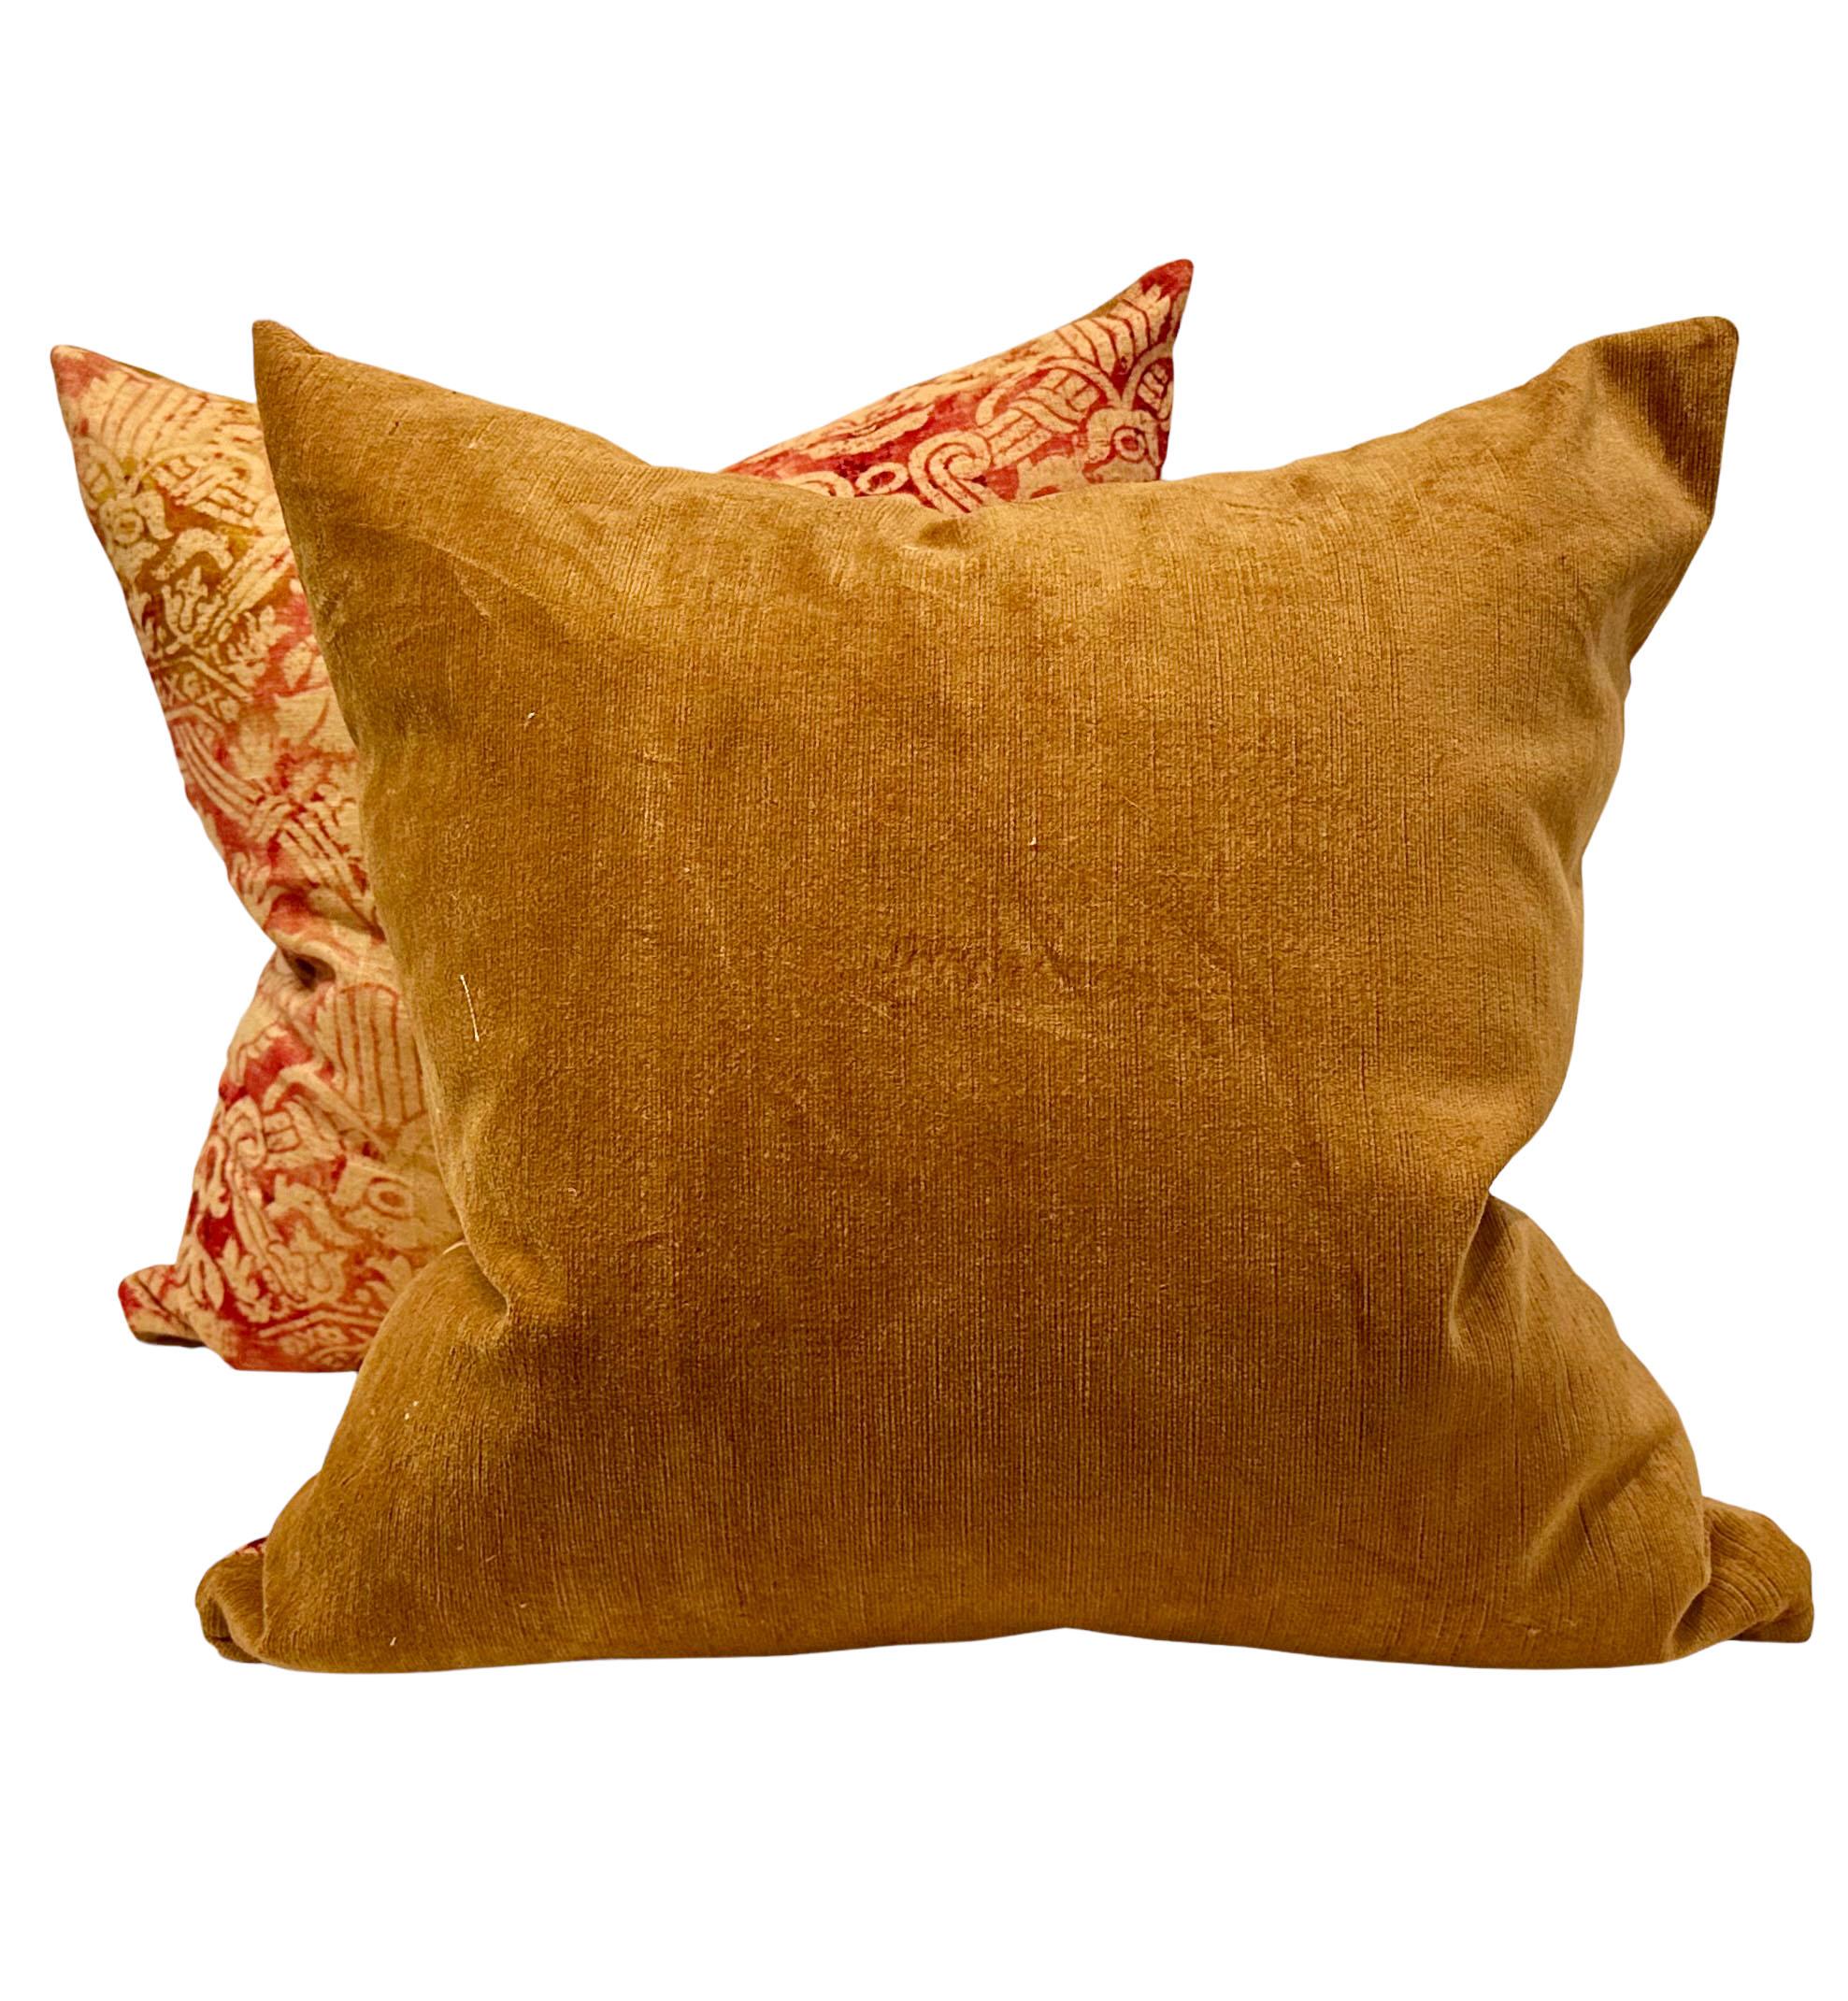 Late 20th Century Vintage Fortuny Pillows - A Pair For Sale